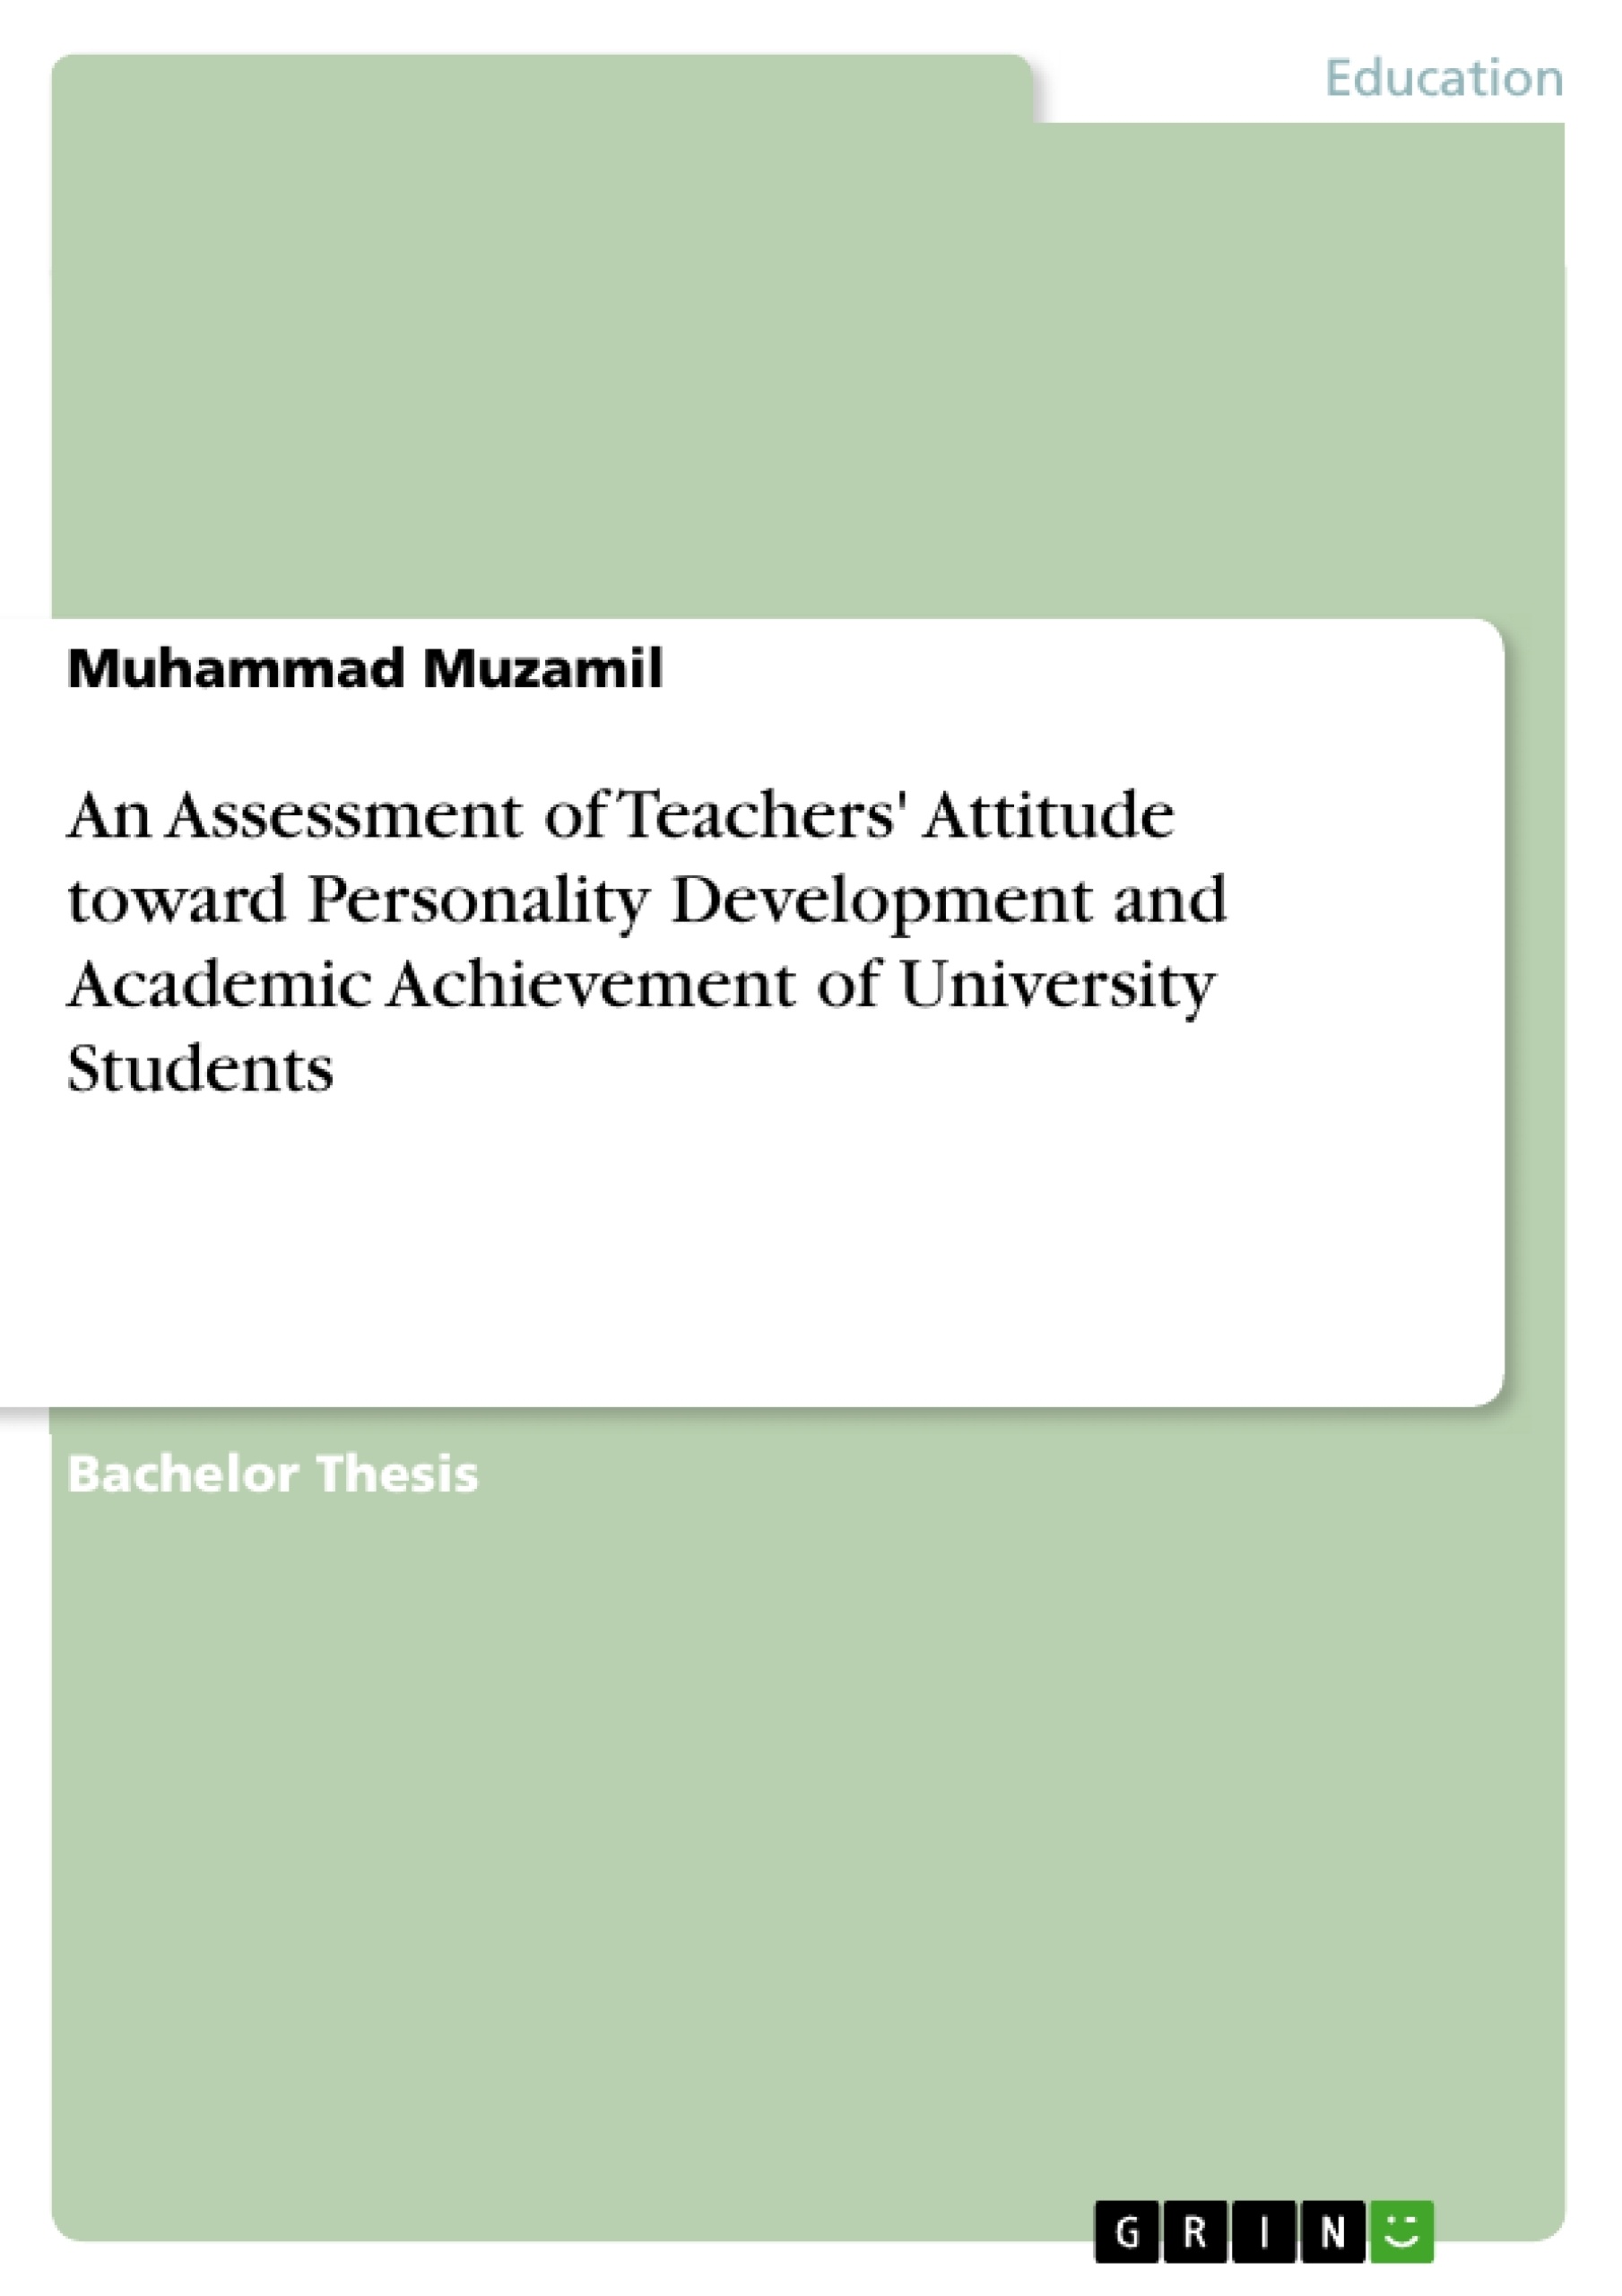 Title: An Assessment of Teachers' Attitude toward Personality Development and Academic Achievement of University Students